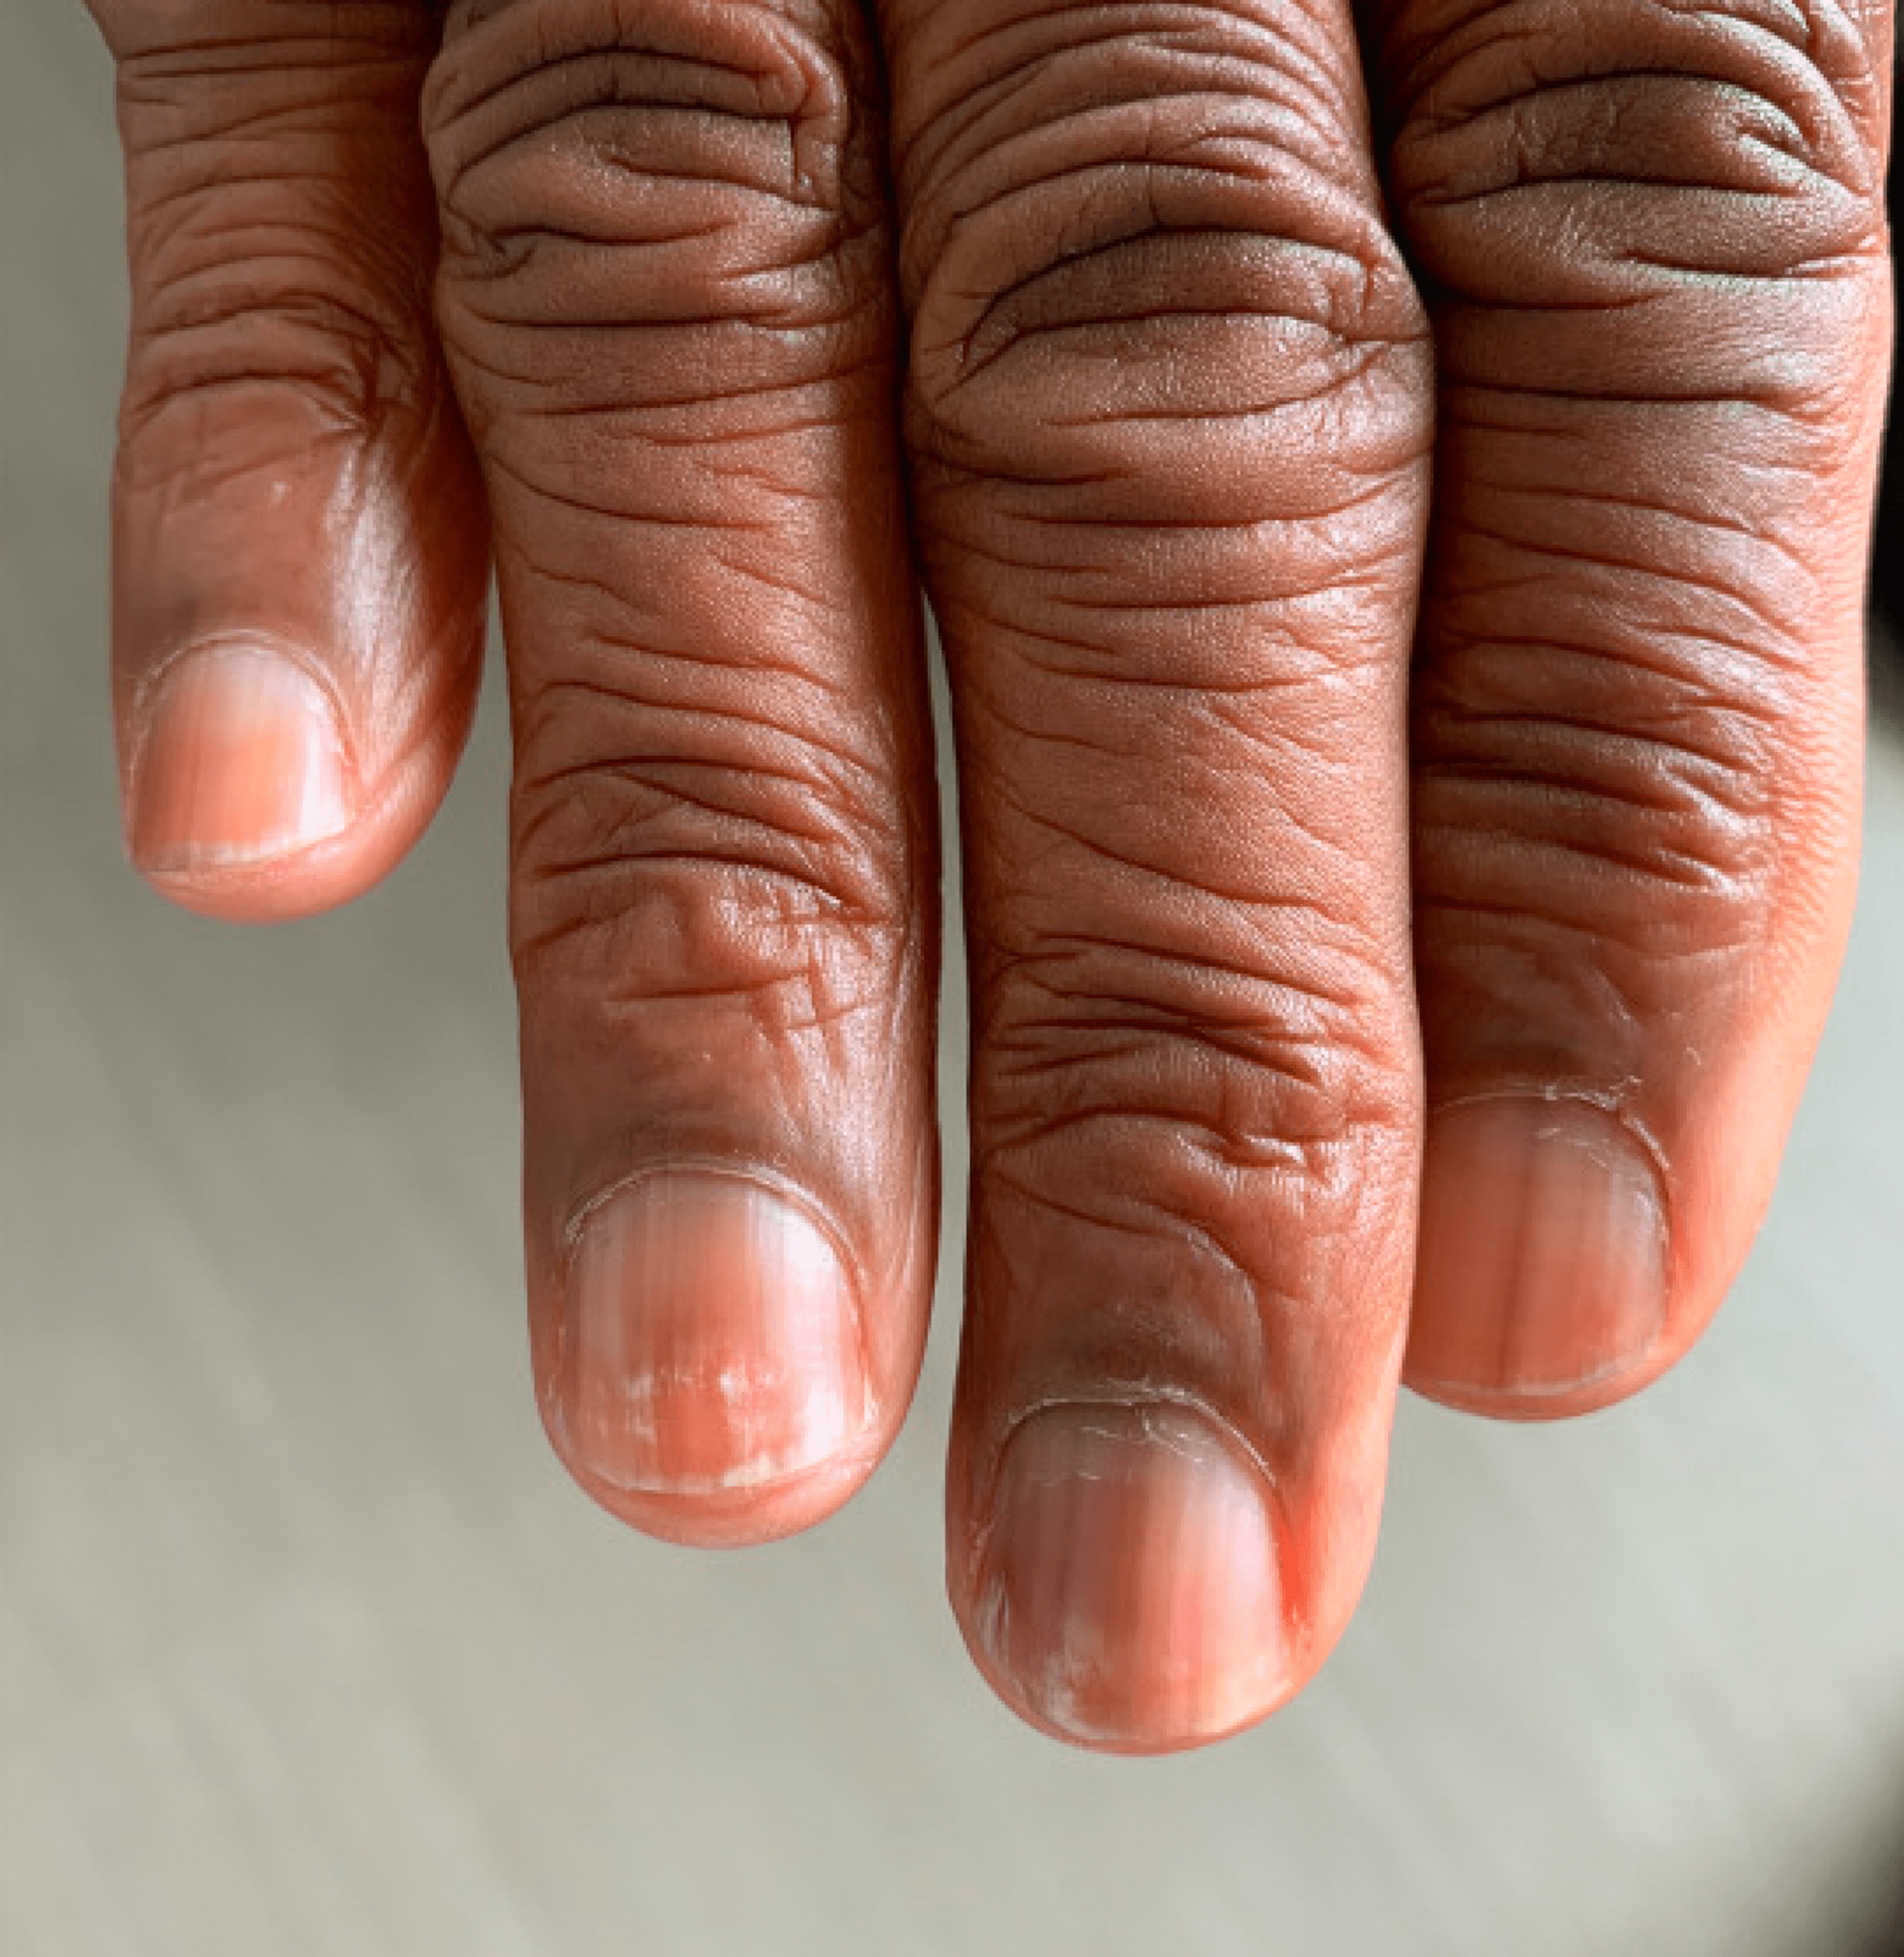 Cureus | Dystrophic Nails: An Unusual Clue to Recurrent Lymphoma | Article